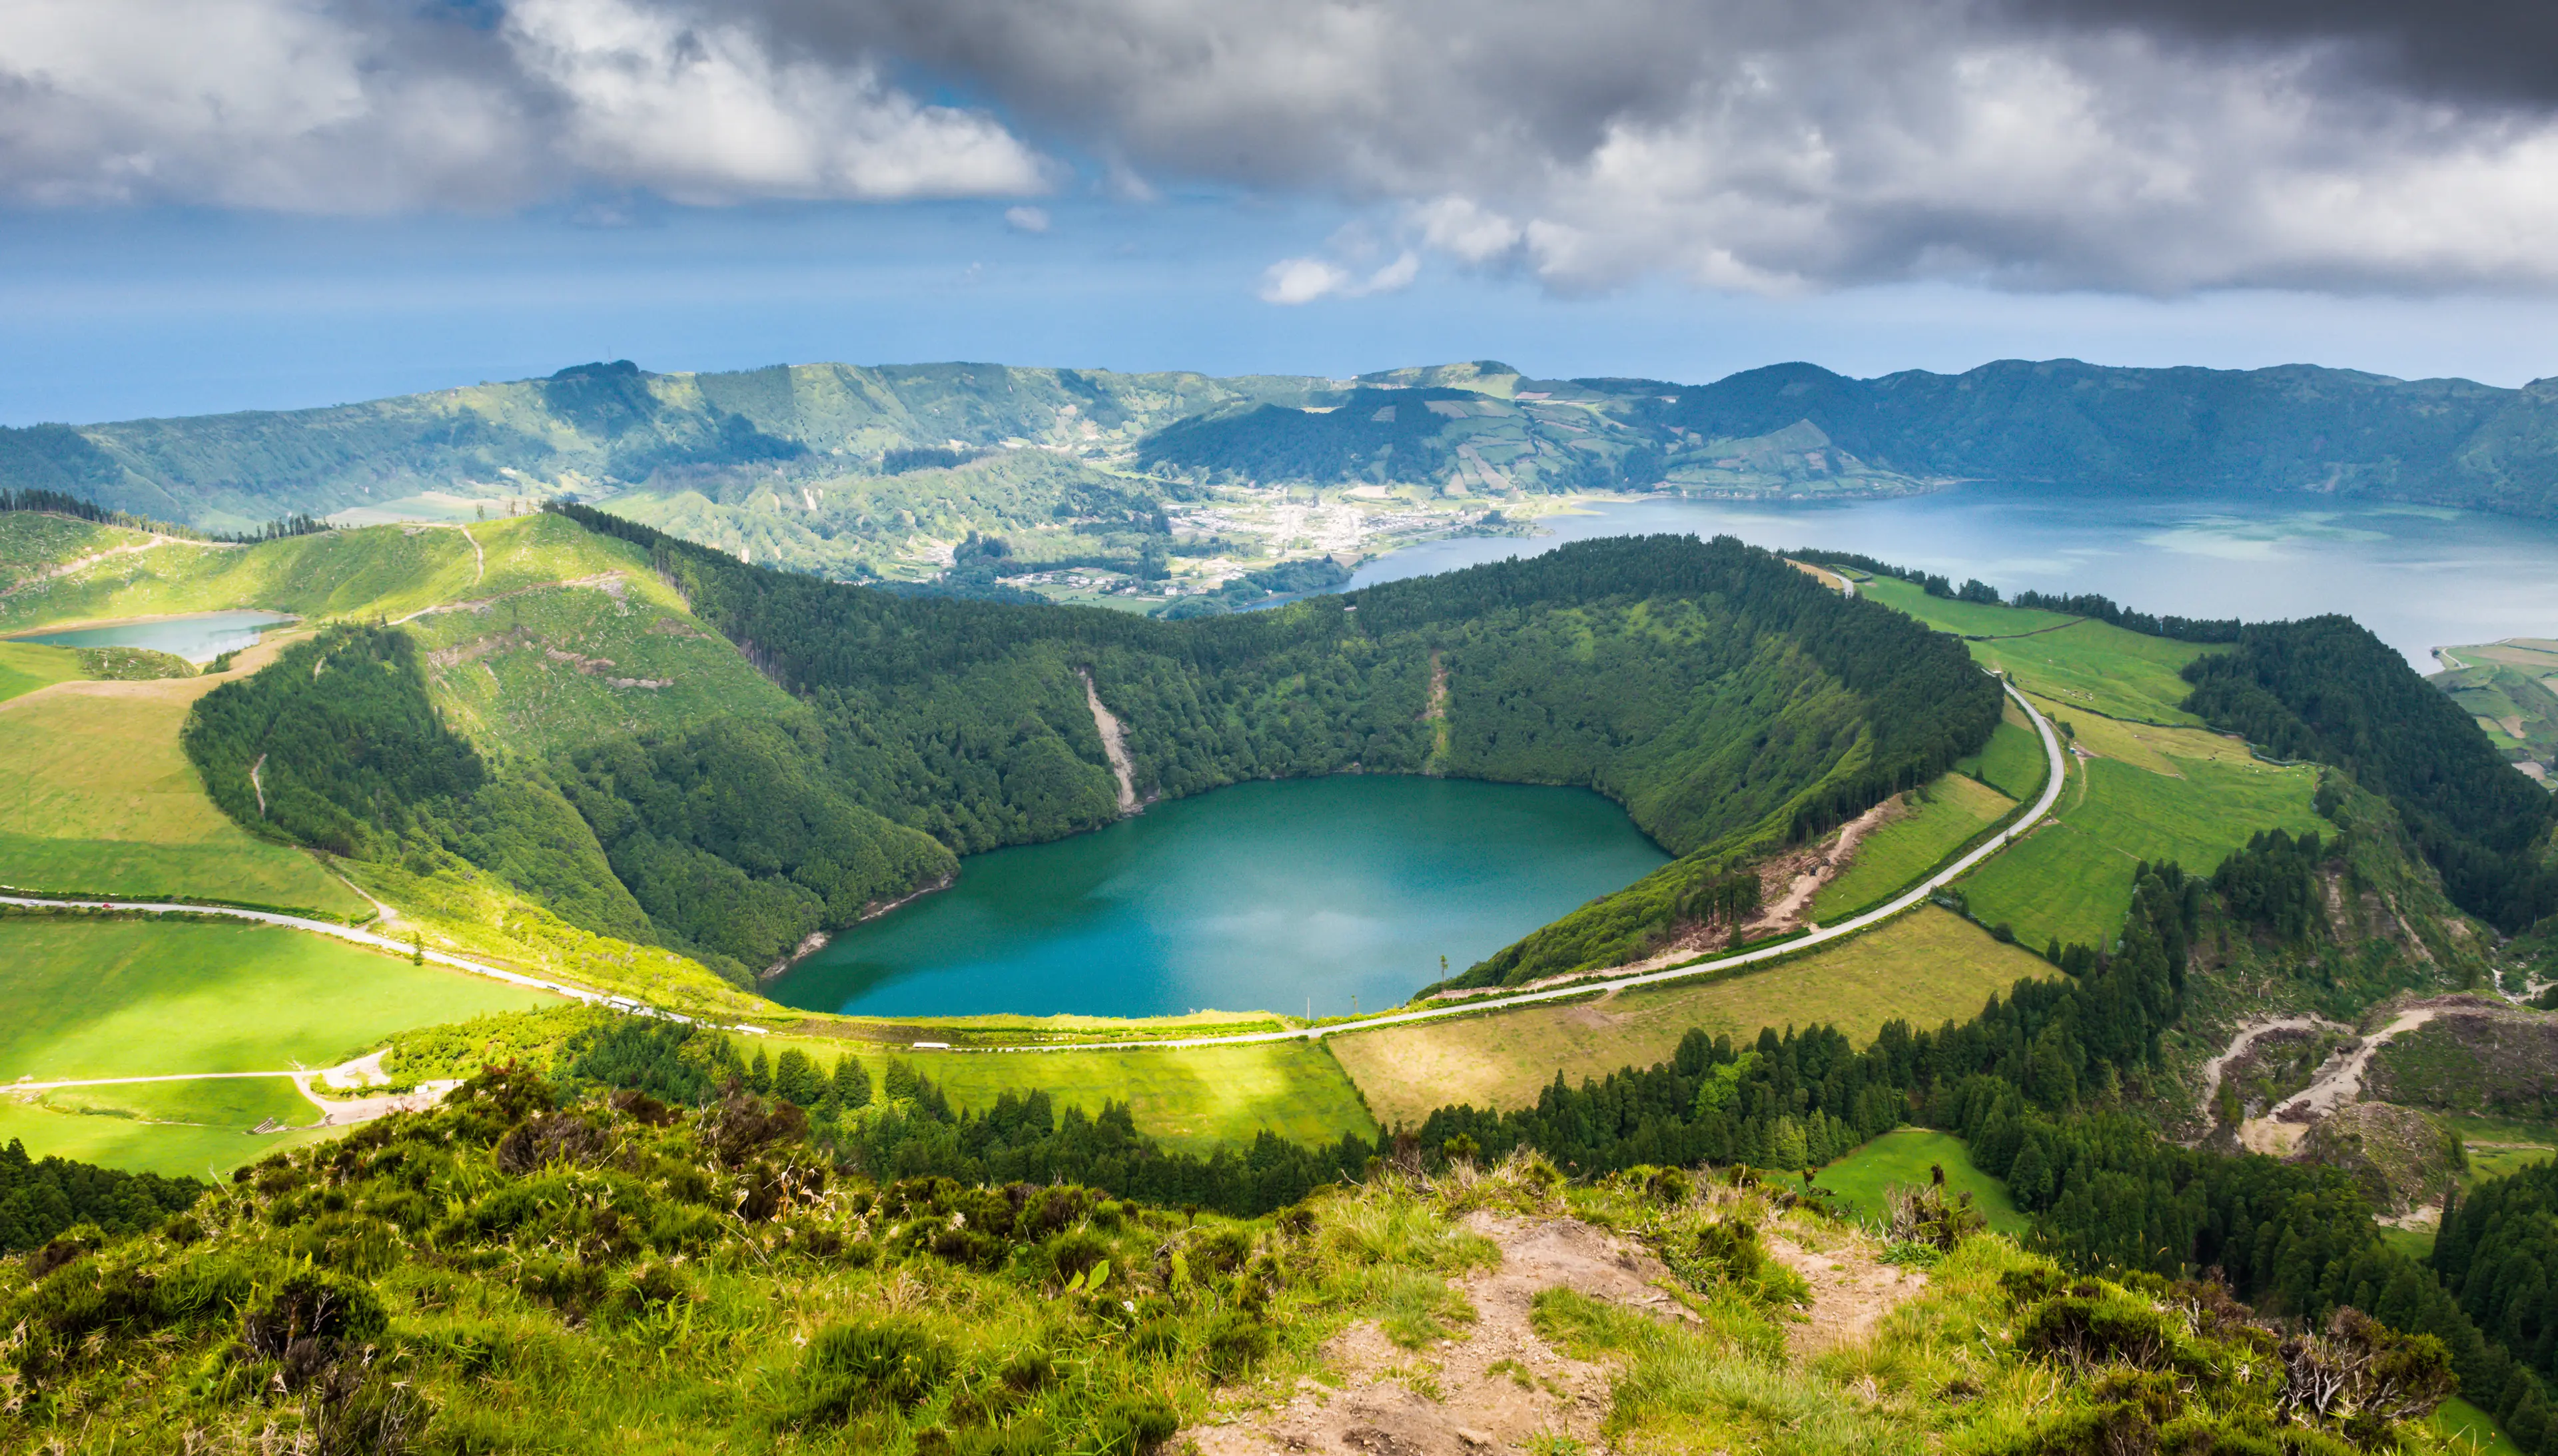 1-Day Romantic Sightseeing and Relaxation Tour in Azores, Portugal